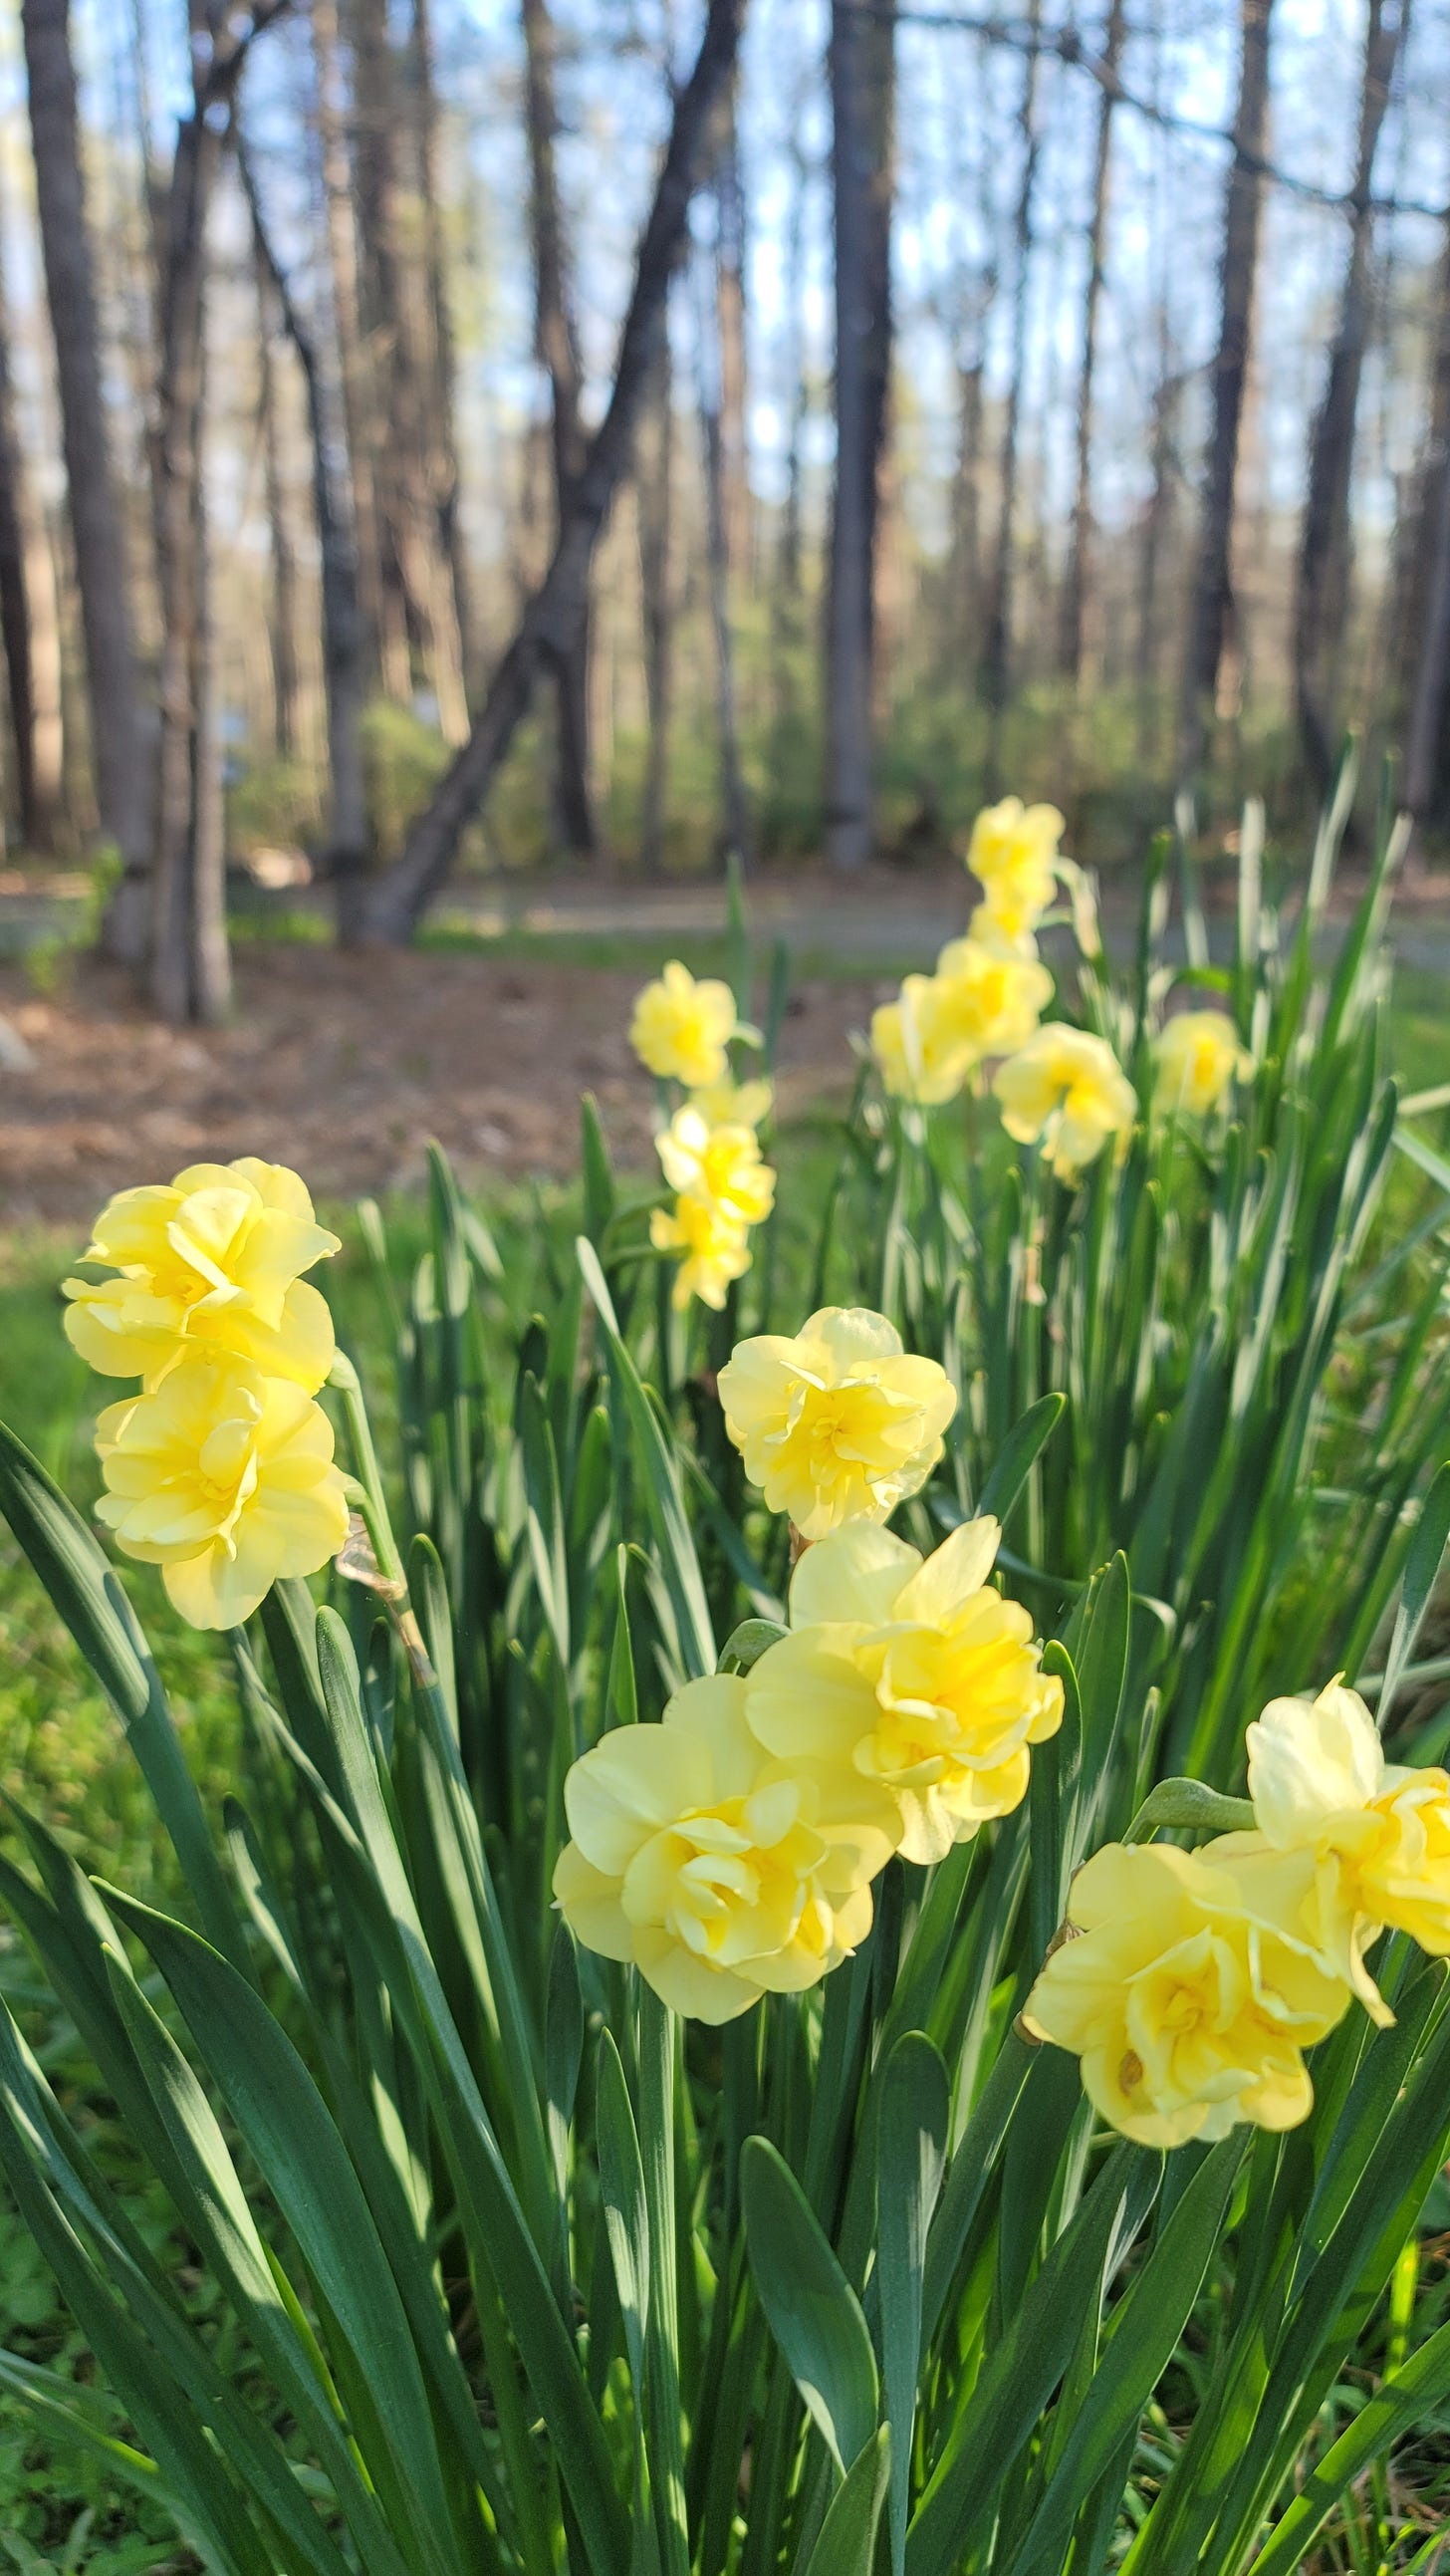 Double narcissus with several blossoms on a scape grow near the woods.